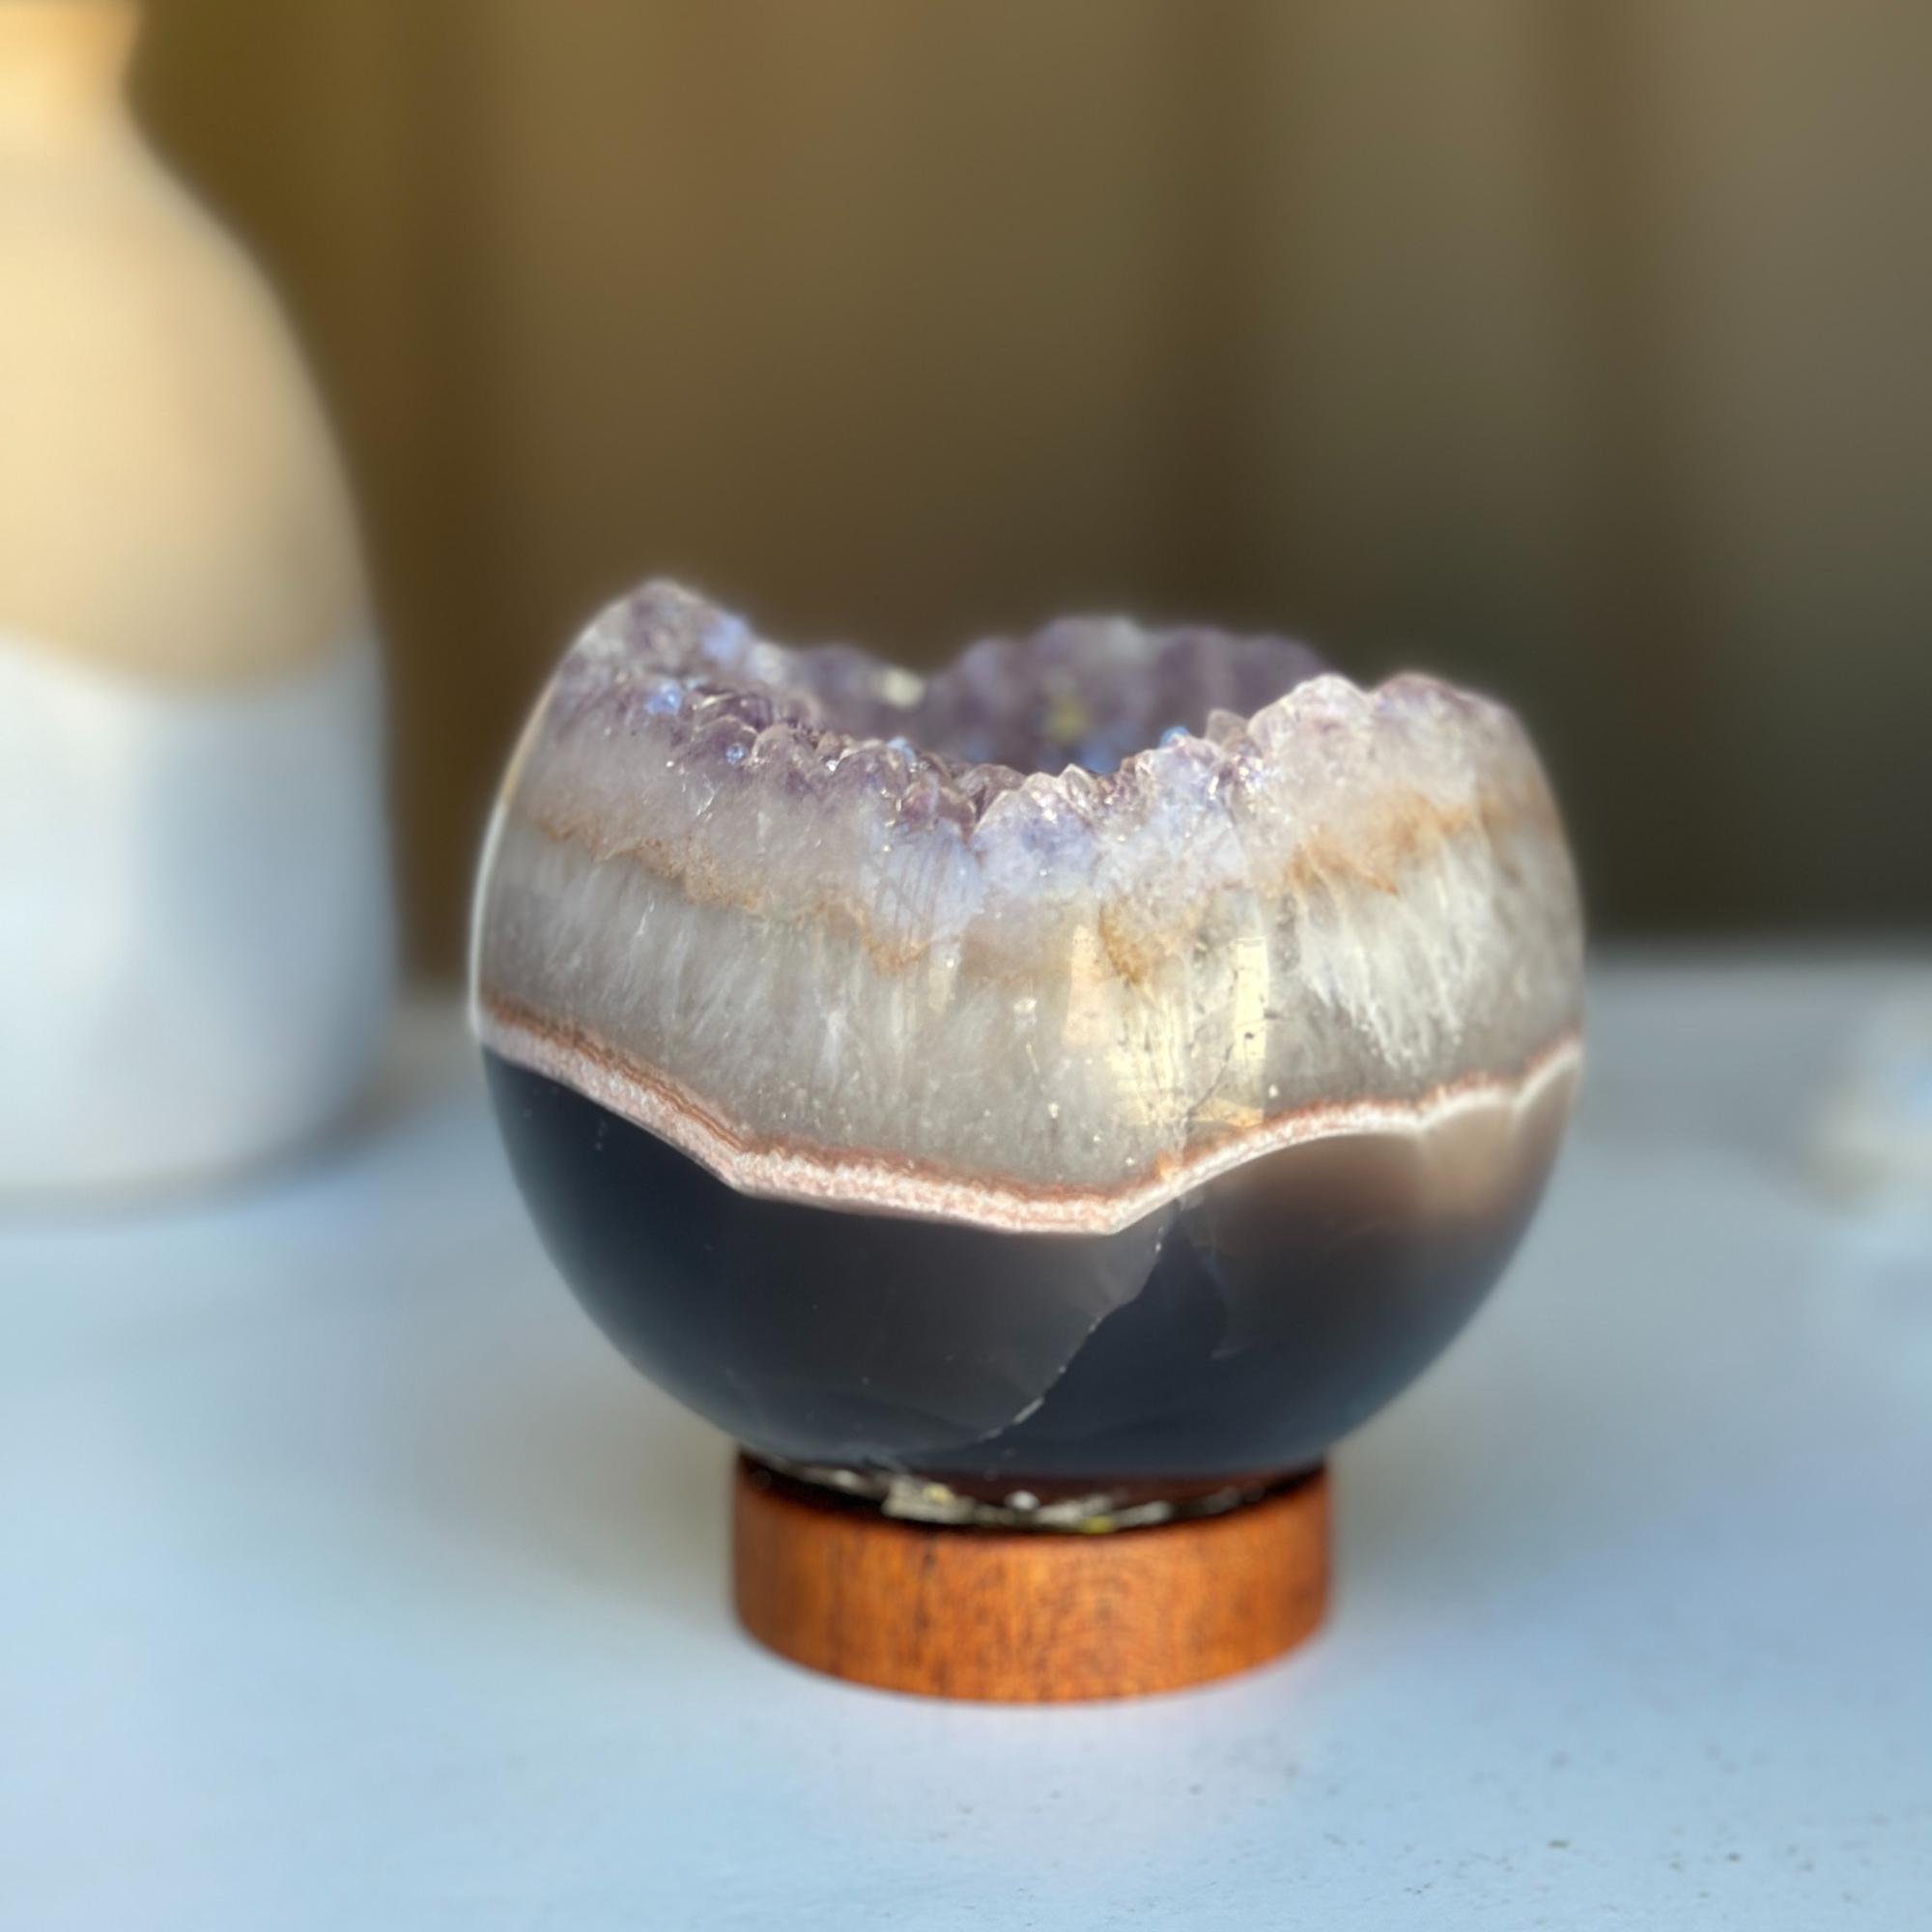 Amethyst Geode Sphere from Uruguay, Druzy Crystal Ball, Large Sphere with Agate formations